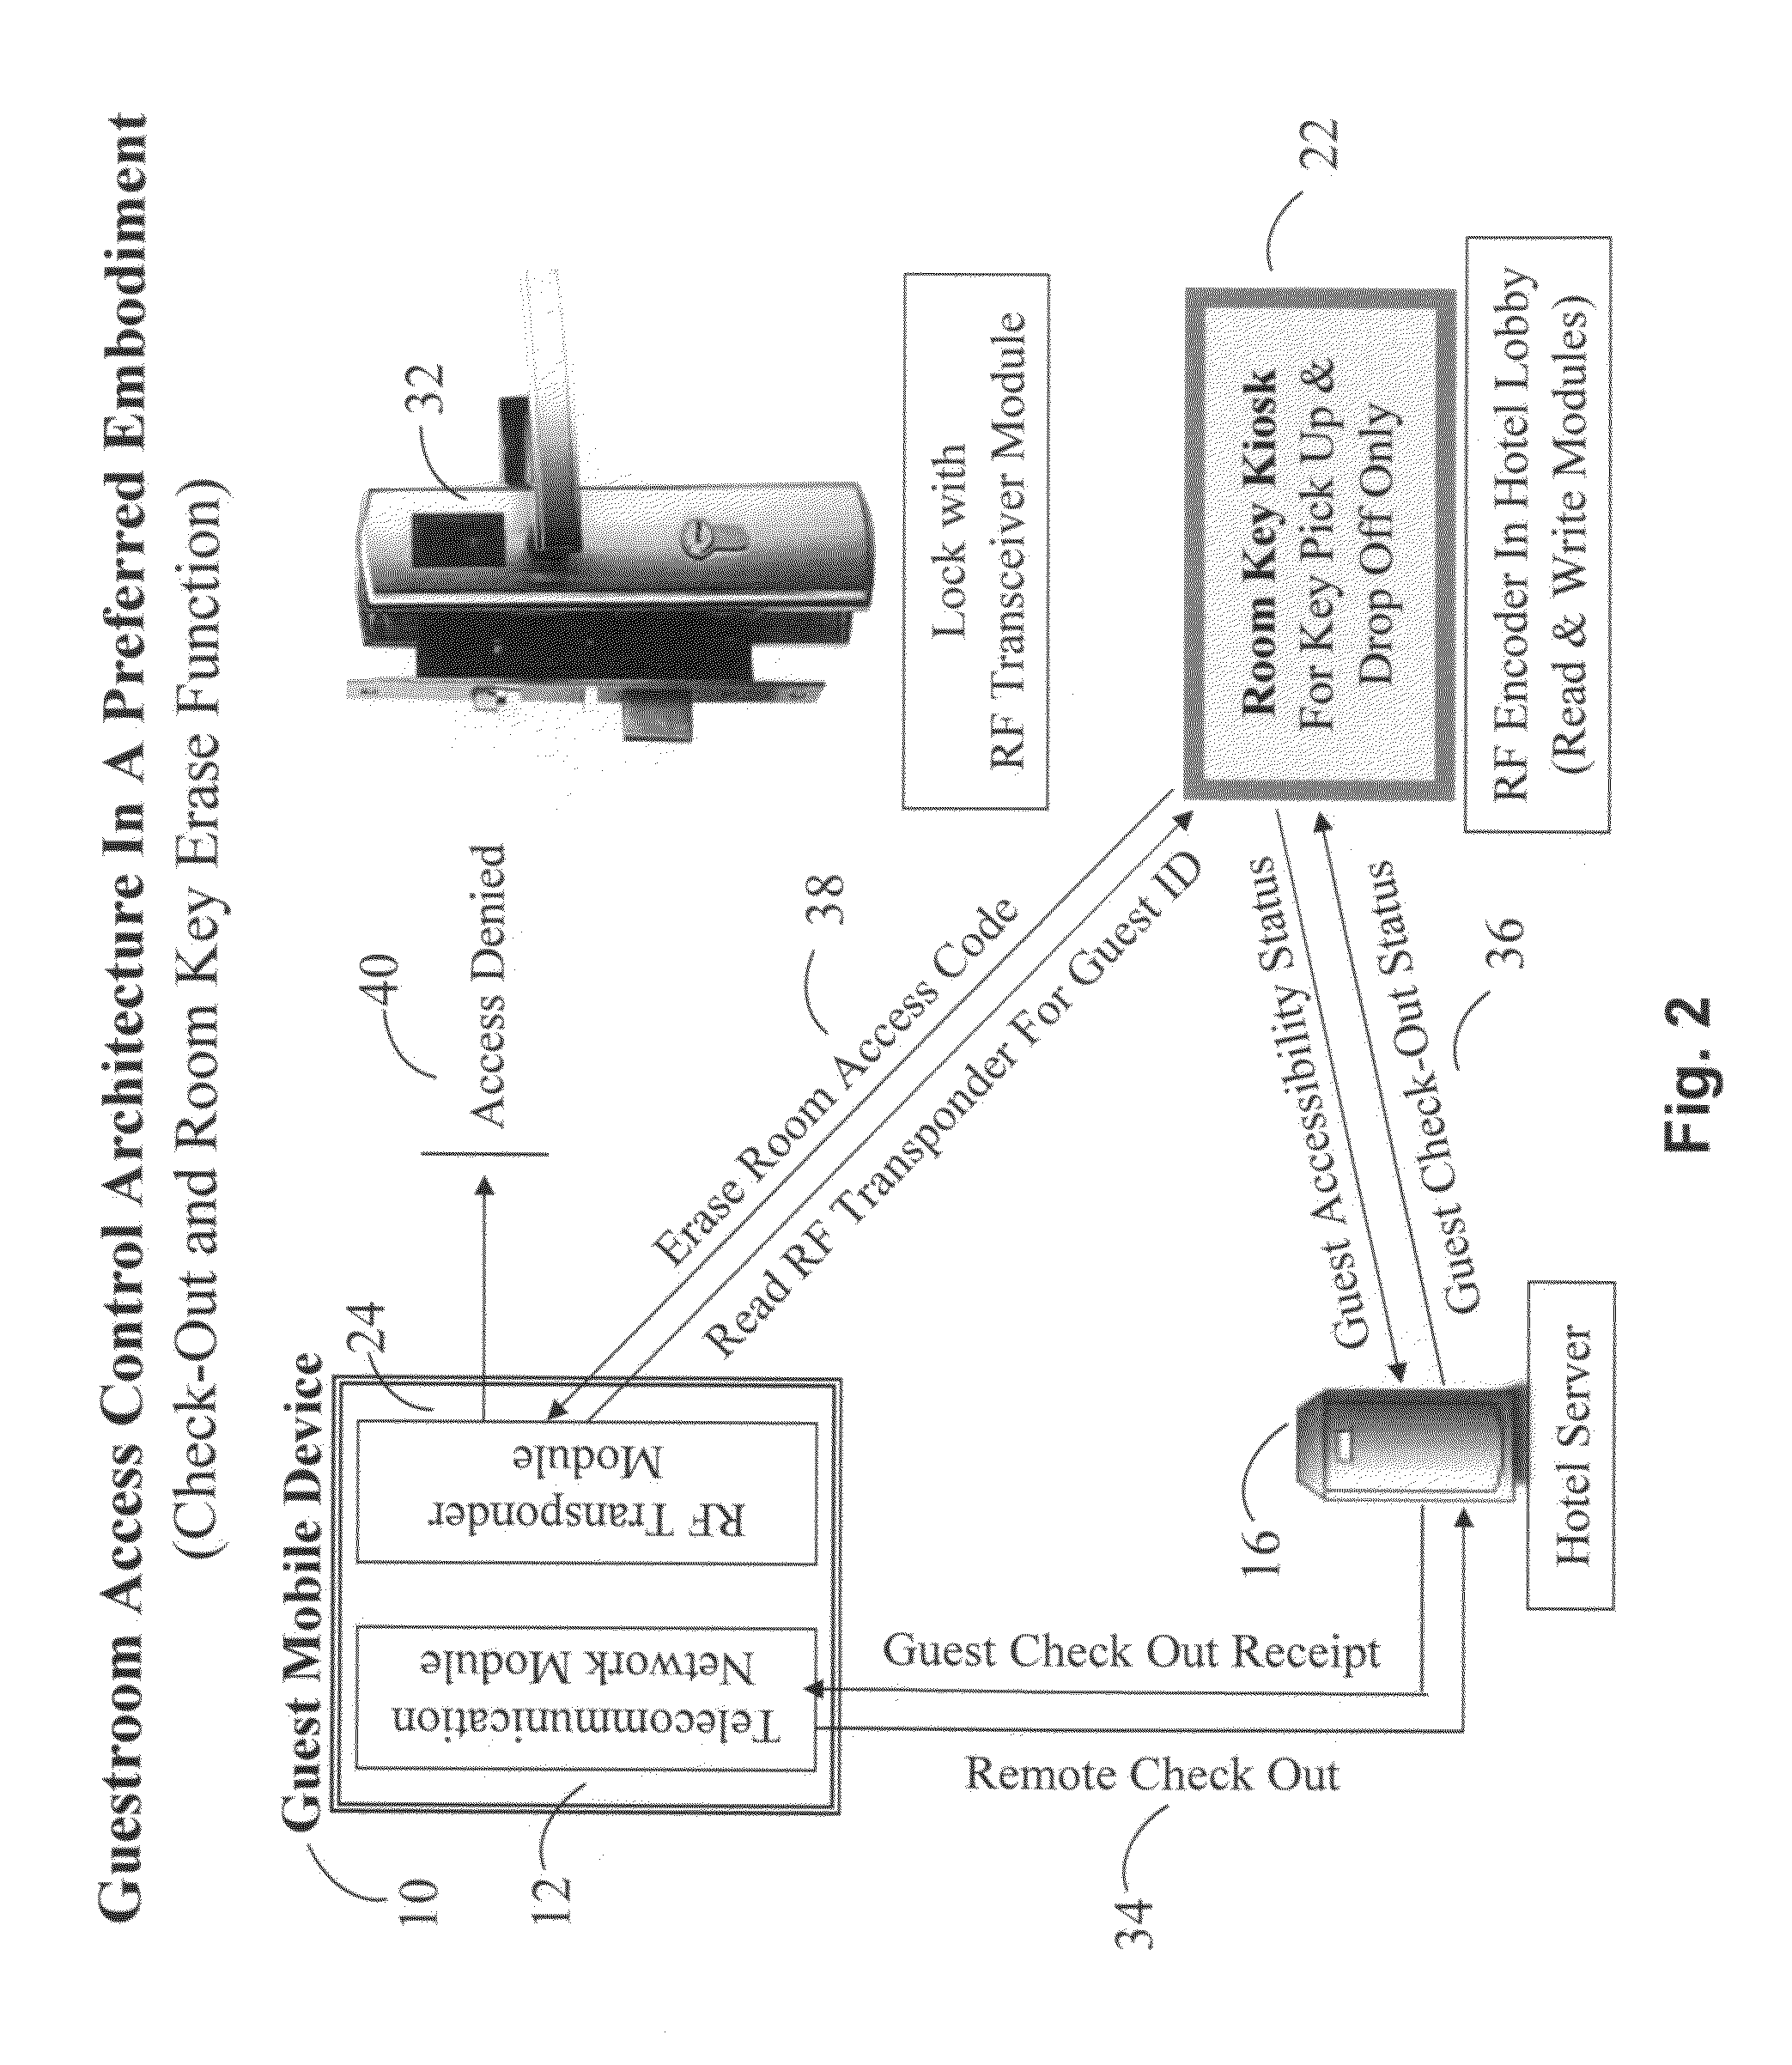 Method of self-service access control for frequent guests of a housing facility